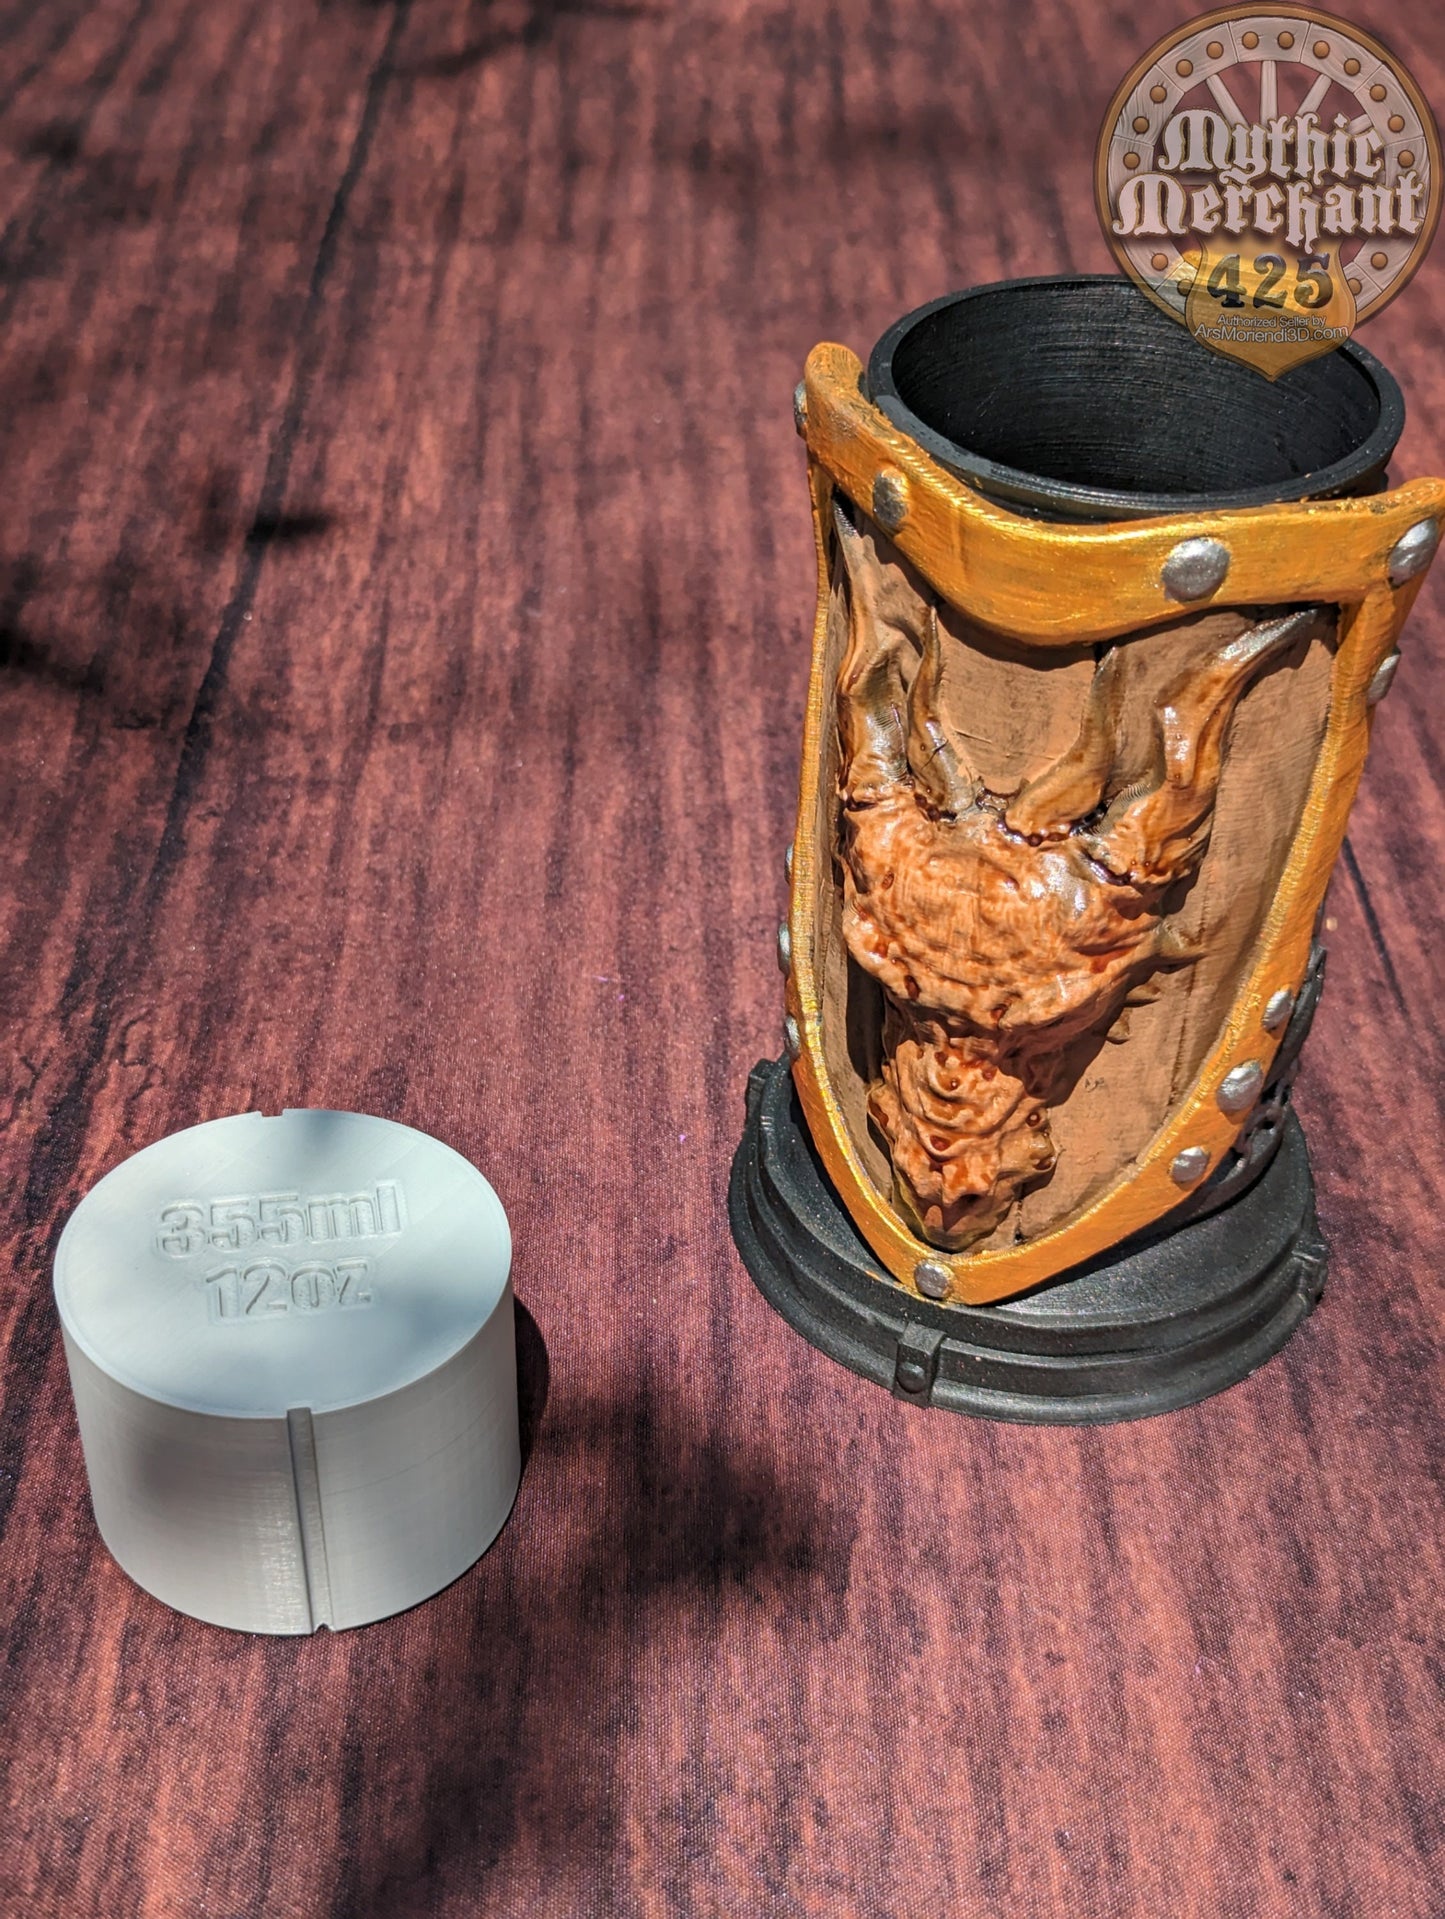 Fighter Class 3D Printed Dice Vault | Drink Koozie | Mug Stein | Tabletop RPG Gaming Fantasy Cosplay - Dungeons and Dragon DnD D&D Wargaming